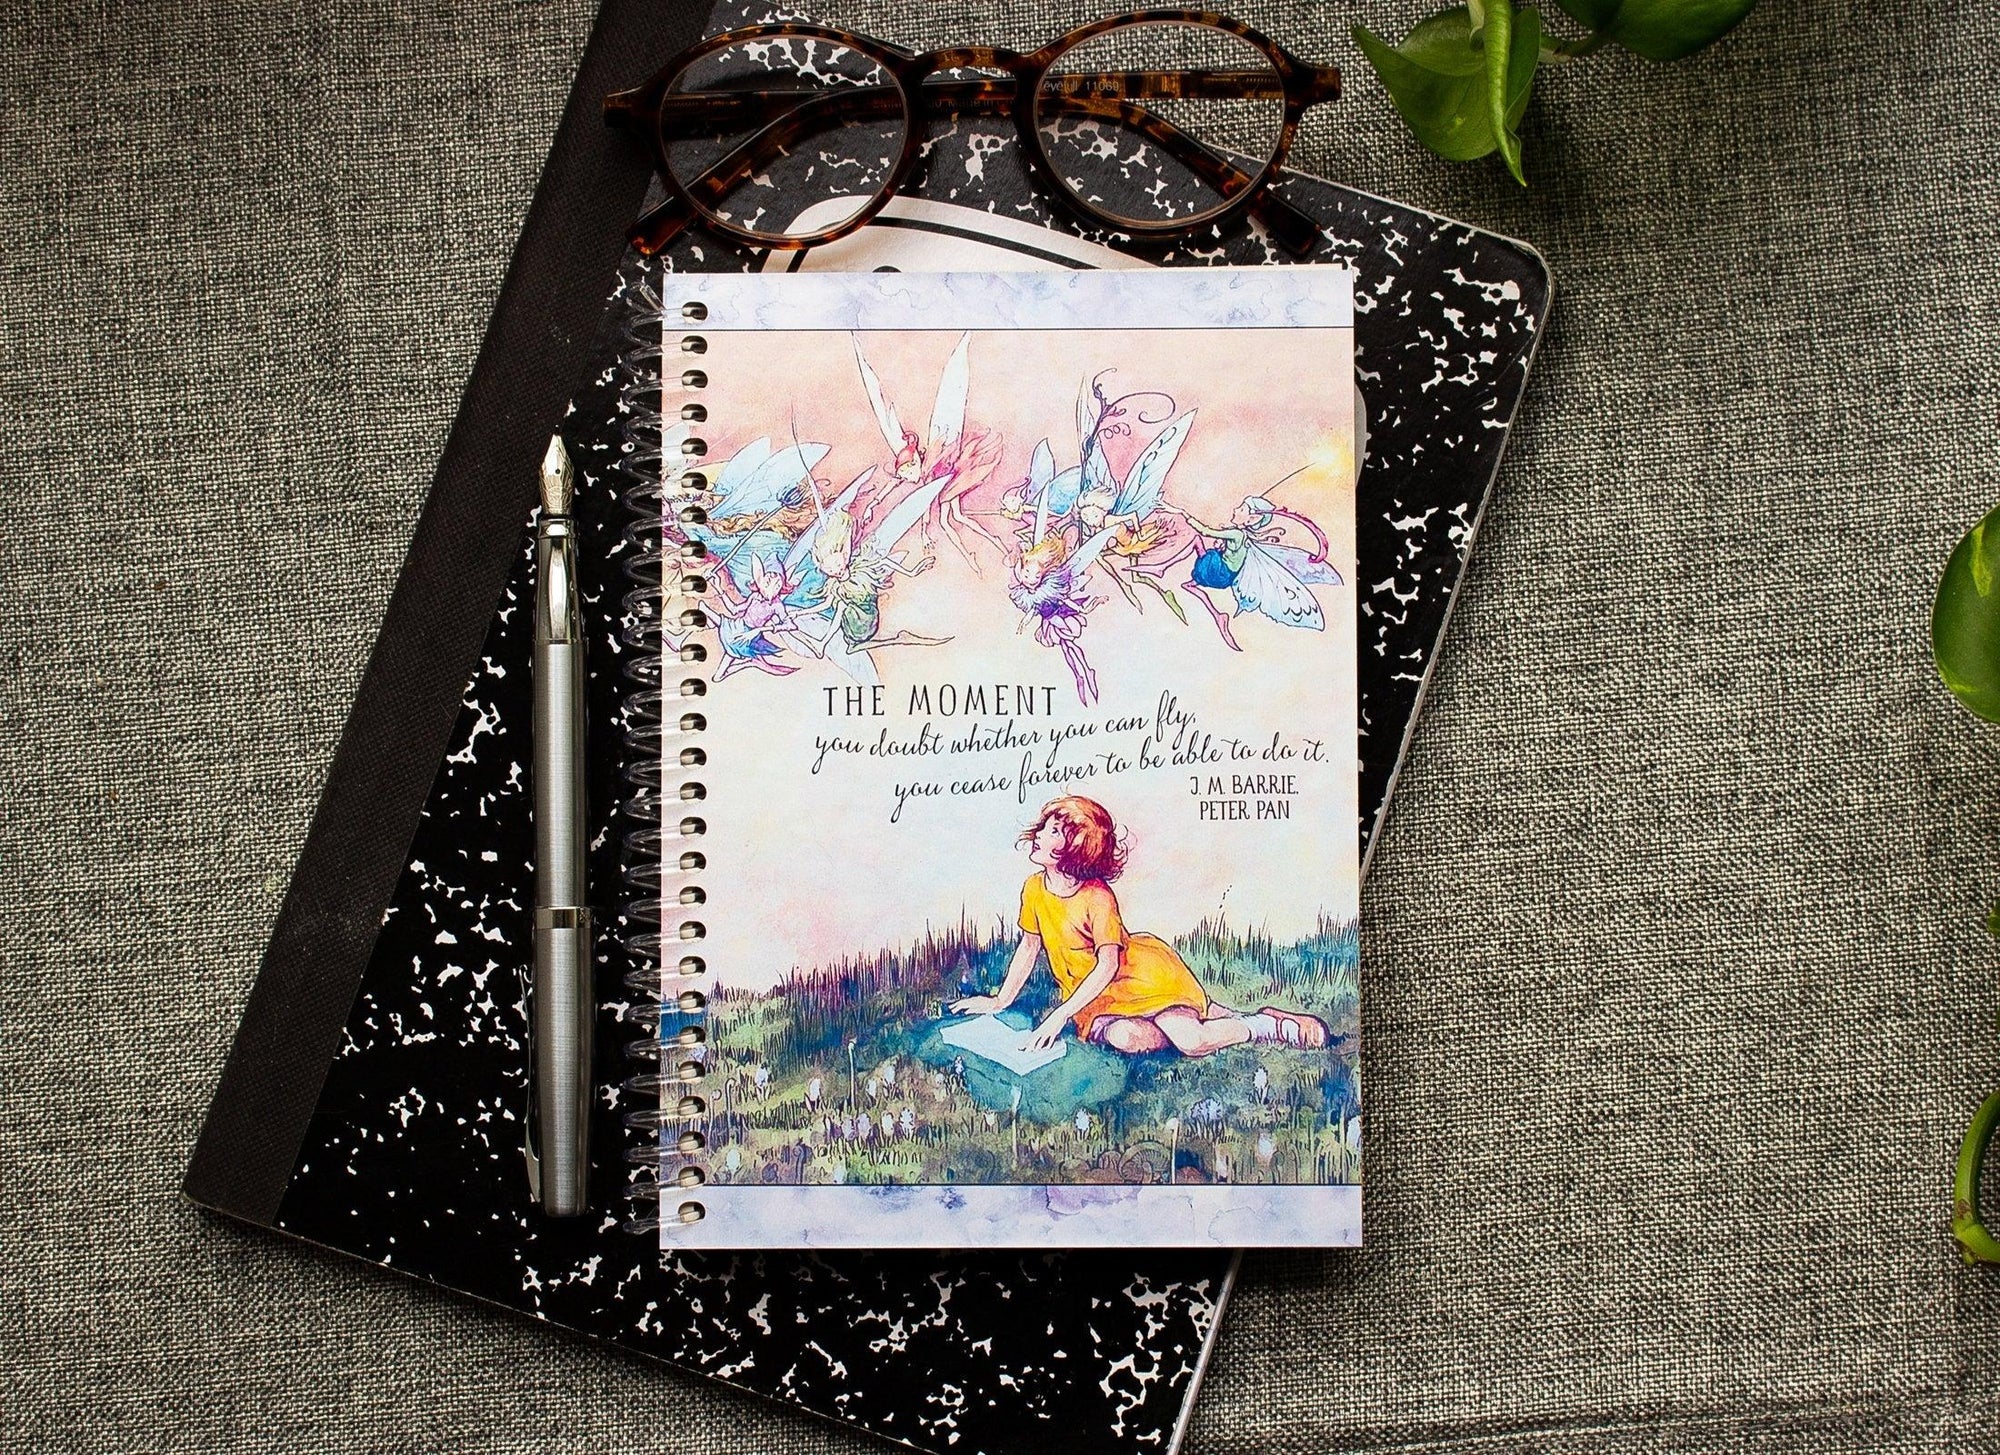 Spiral Bound Notebook - Fairies & Girl Reading Note Book - Peter Pan Quote Journal - Gift for Granddaughter - Lined and Dot Grid Pages